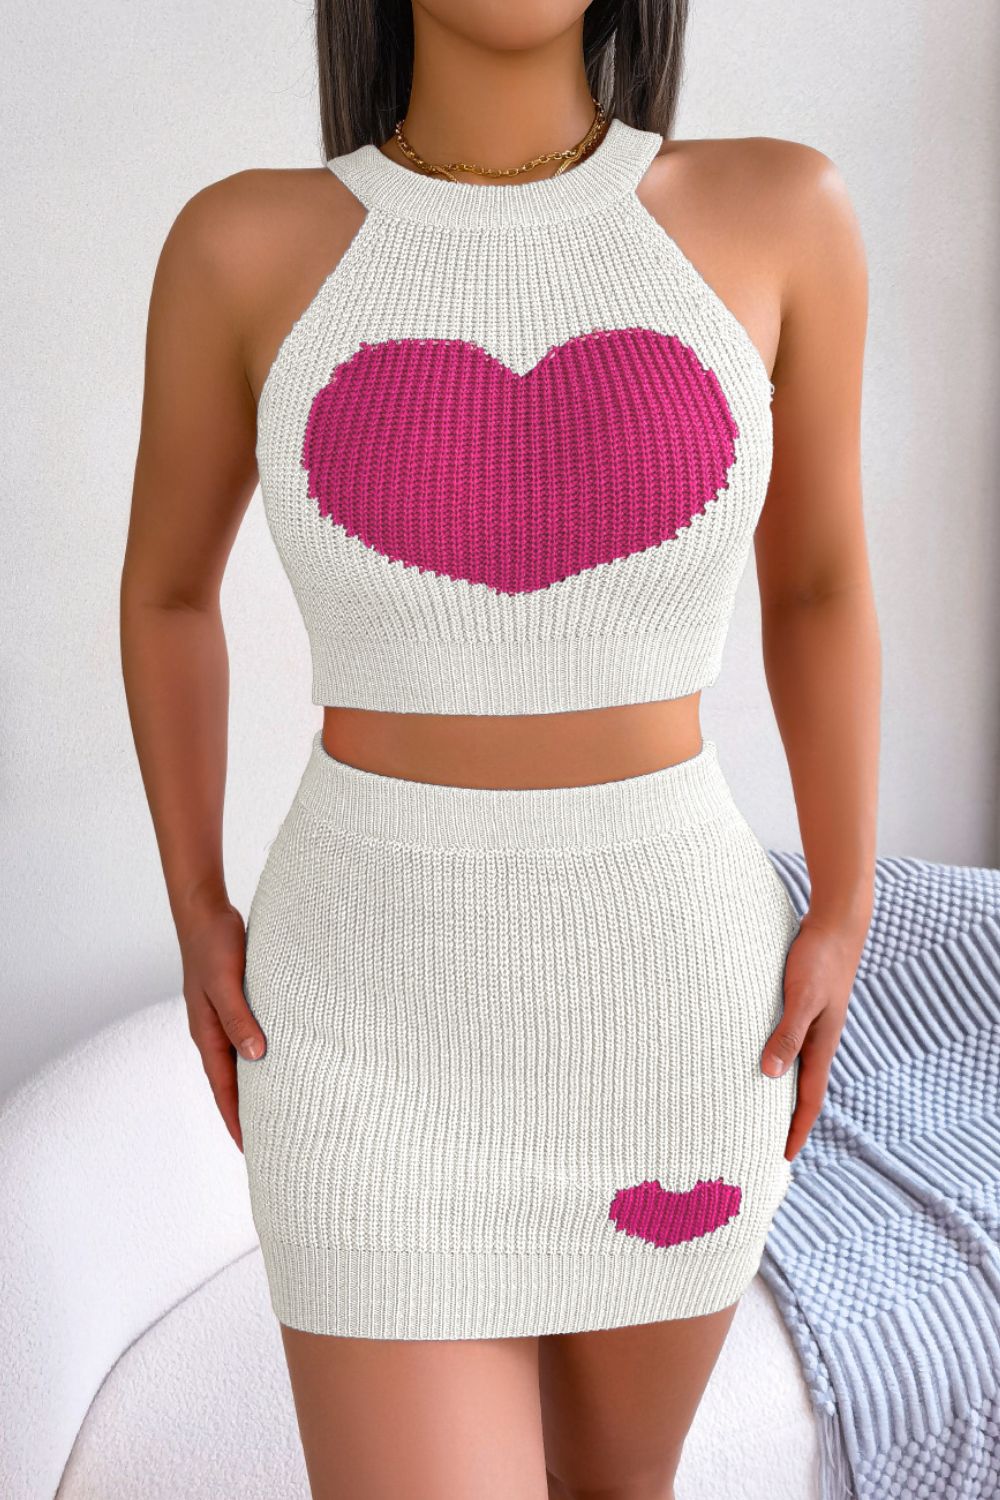 Heart Contrast Ribbed Sleeveless Knit Top and Skirt Set - Guy Christopher 